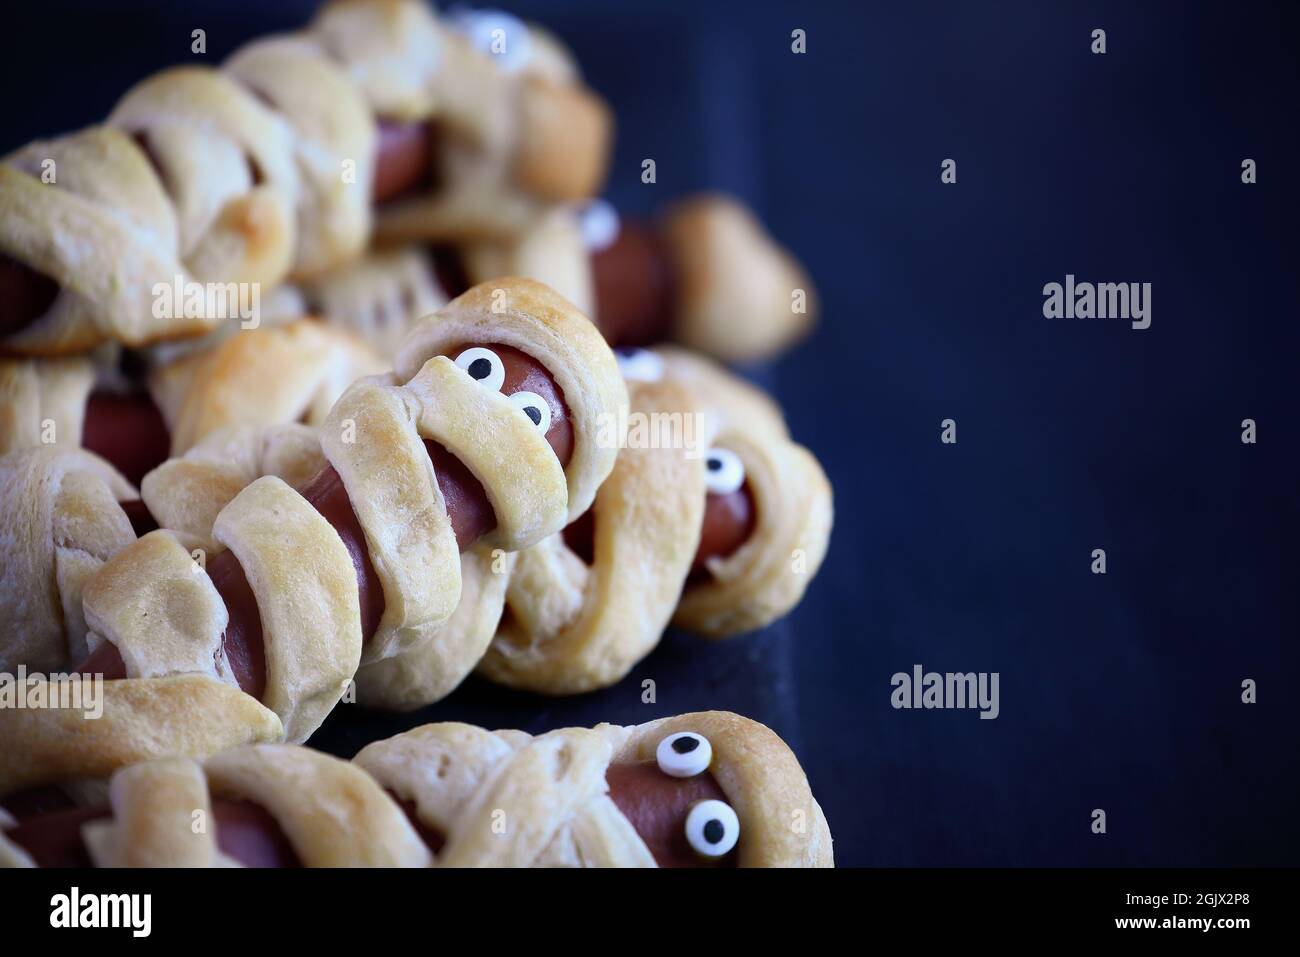 Fun food for kids. Group of mummy hot dogs on a blue rustic table. Selective focus with blurred foreground and background. Stock Photo